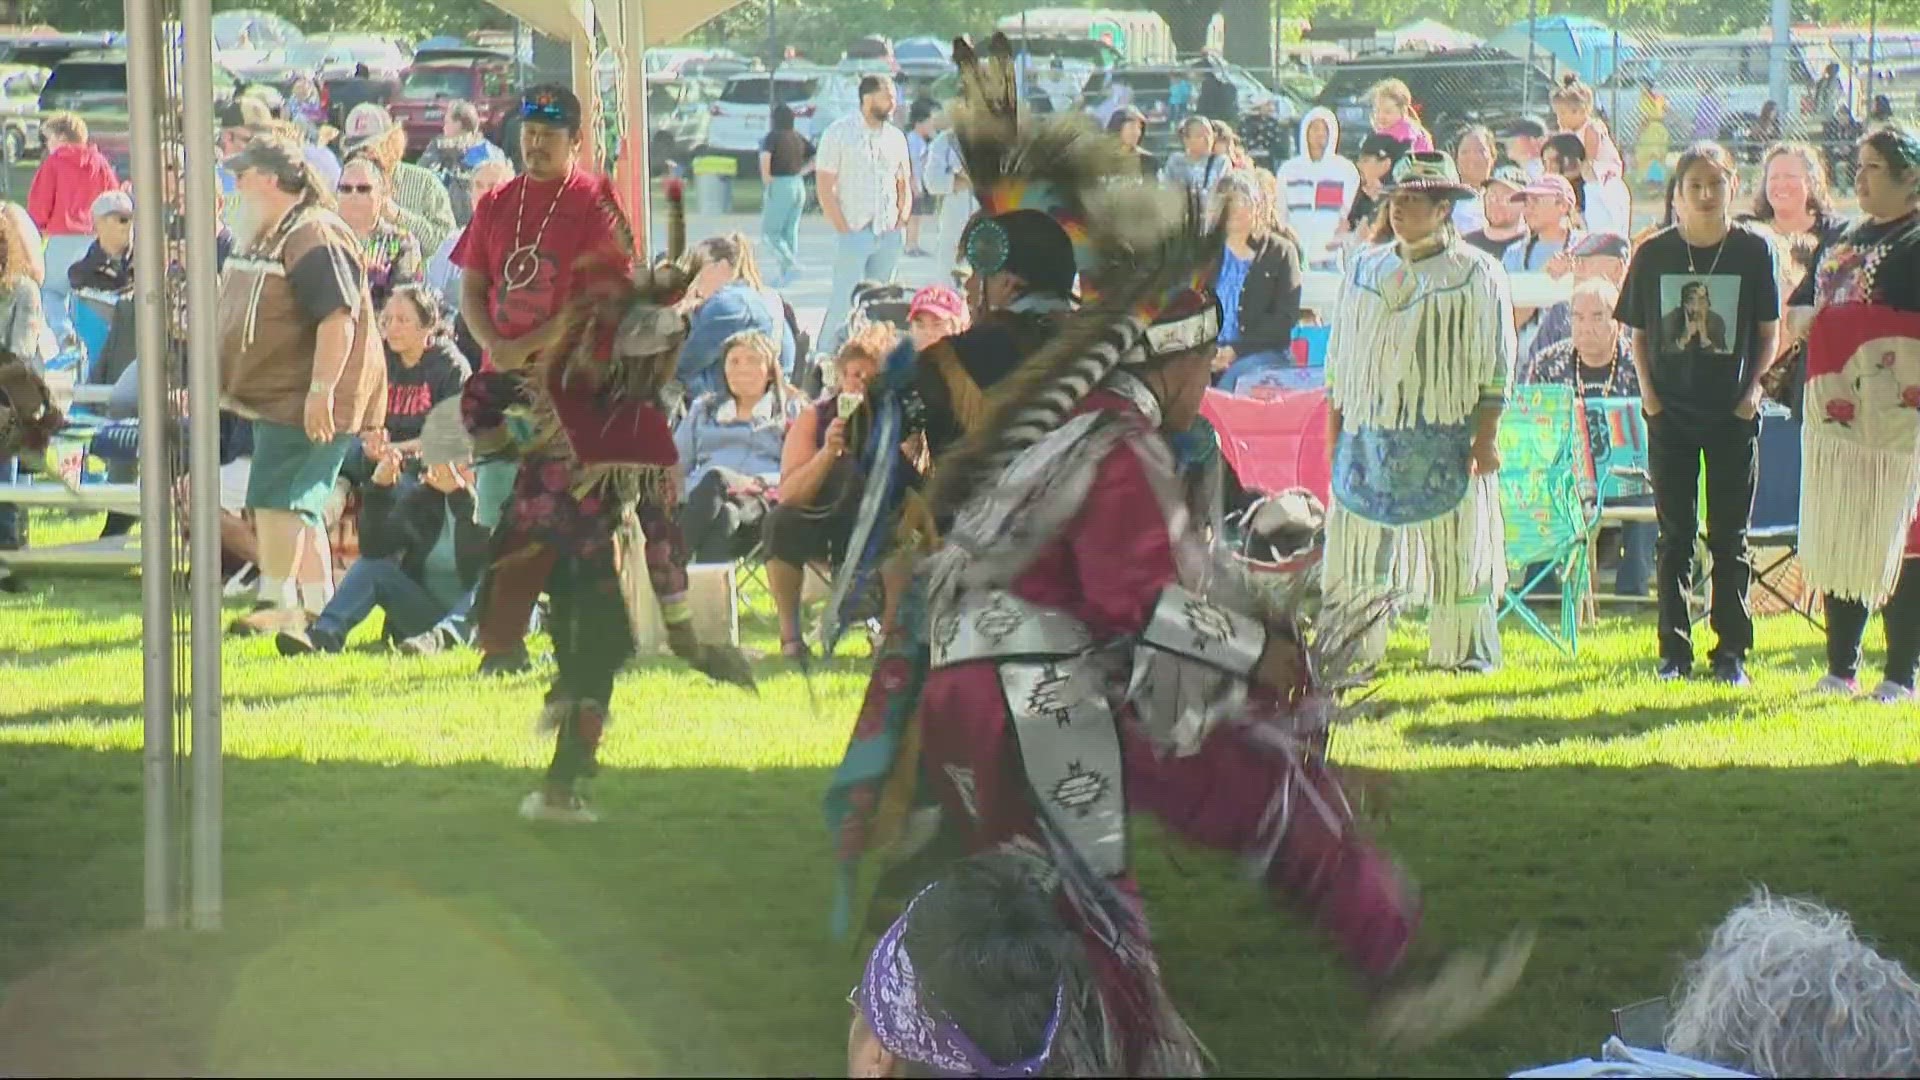 The family-friendly event in North Portland featured intertribal dancing, cultural exhibitions, arts and craft vendors, food and more.